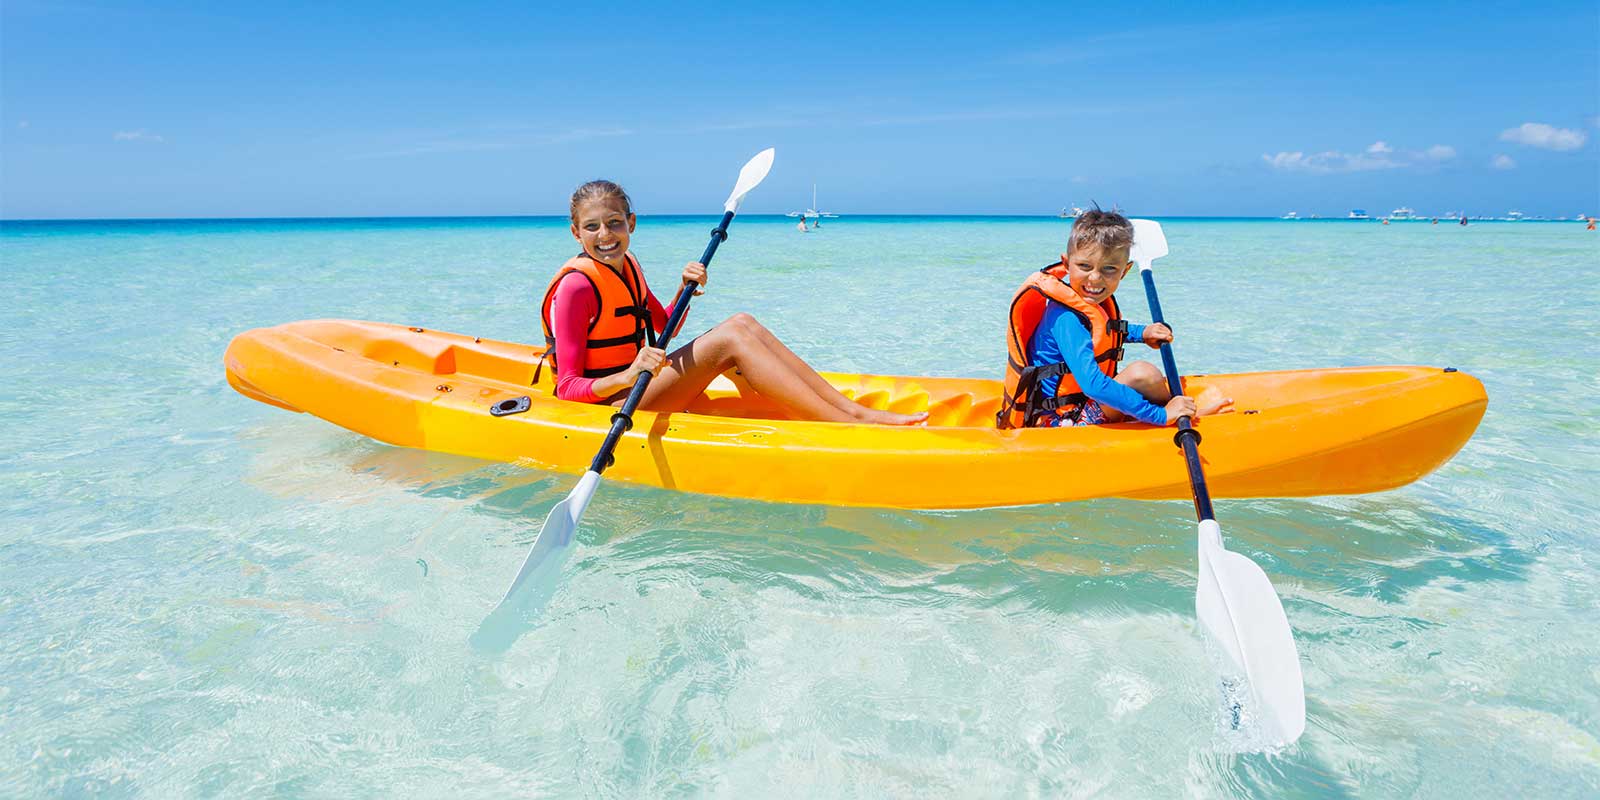 Children sea kayaking on a family holiday